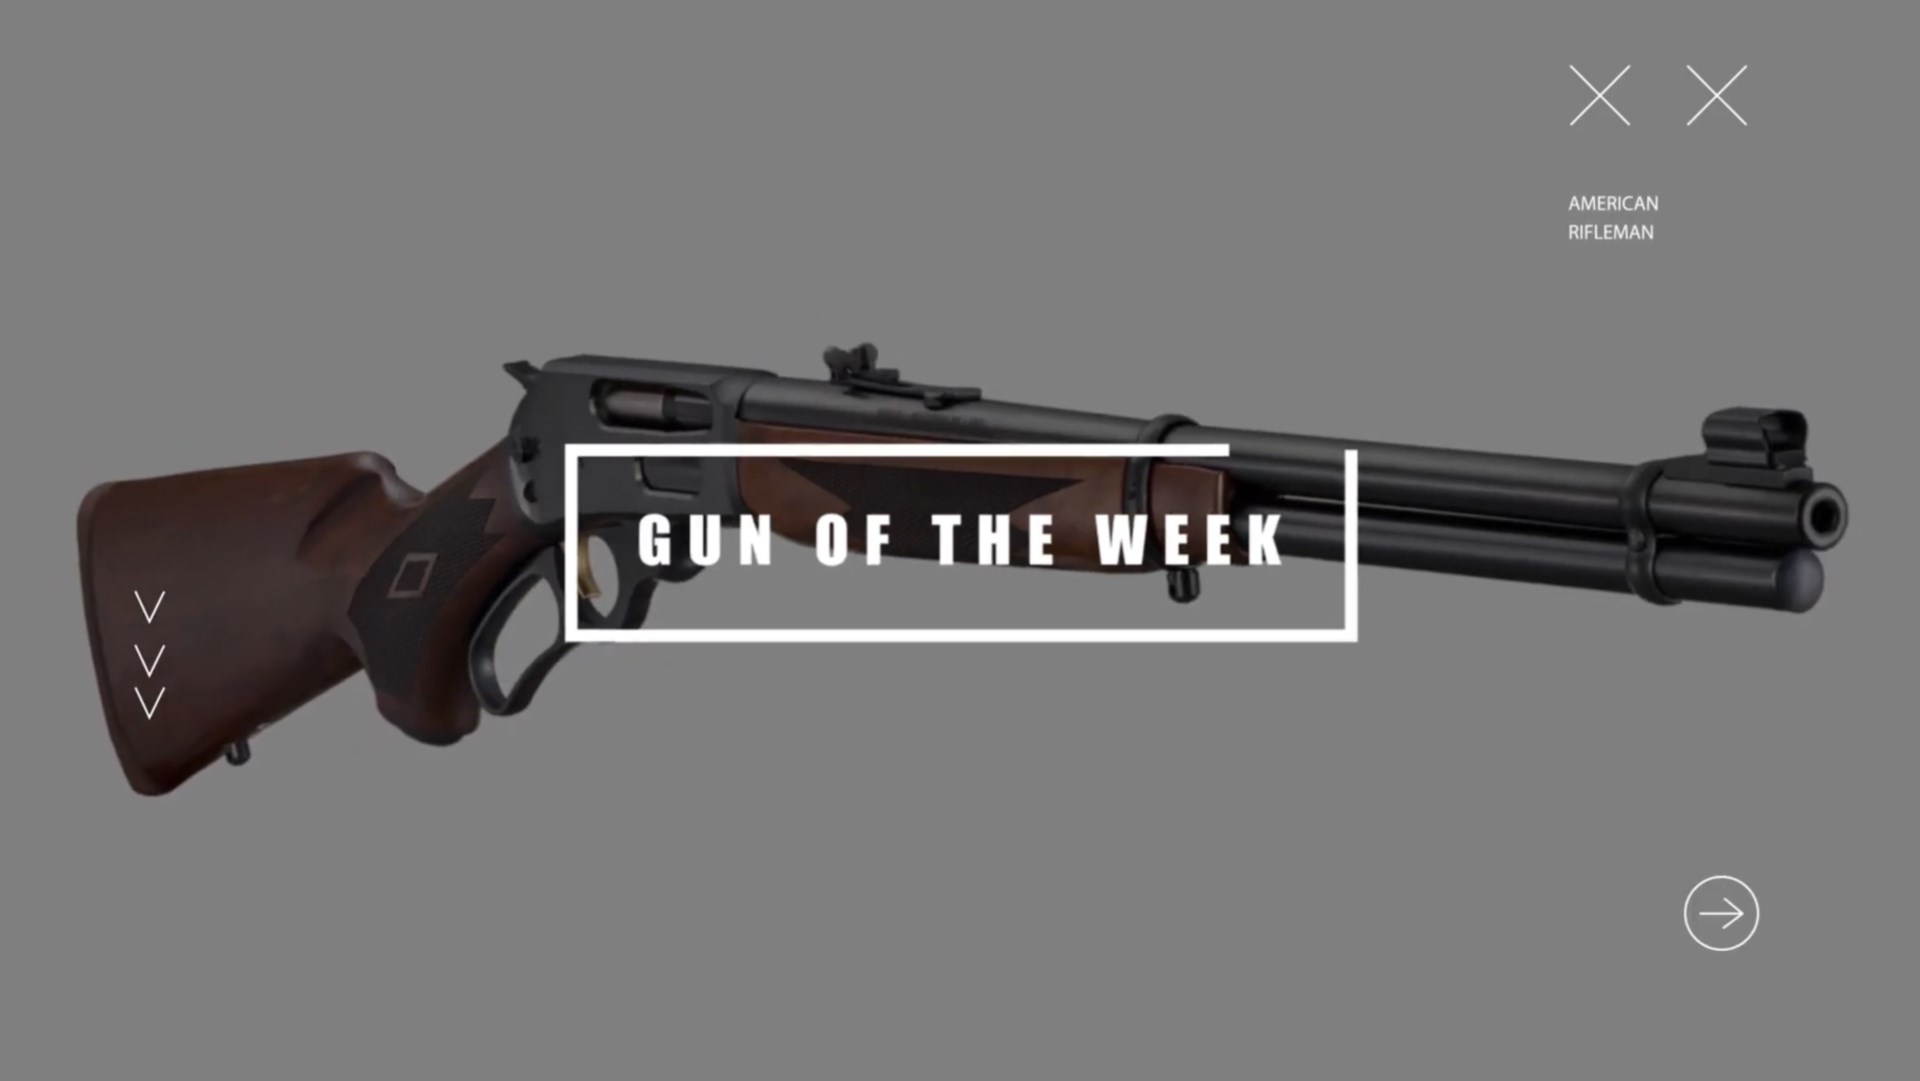 GUN OF THE WEEK title screen text overlay marlin model 336 classic lever-action rifle background blurred gray X AMERICAN RIFLEMAN arrows